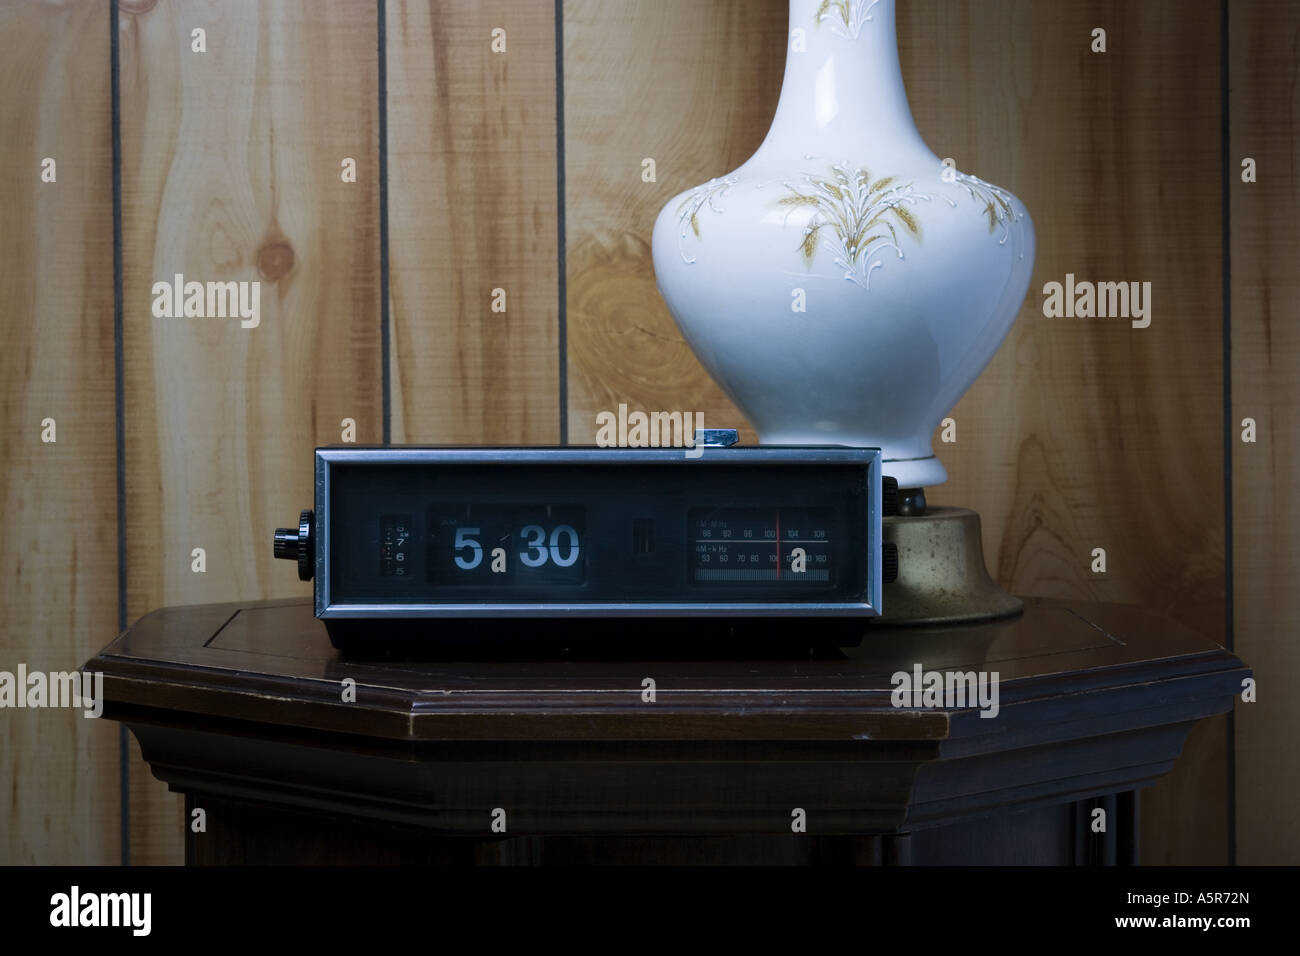 Table Lamp And Alarm Clock At 5 30 Stock Photo Alamy